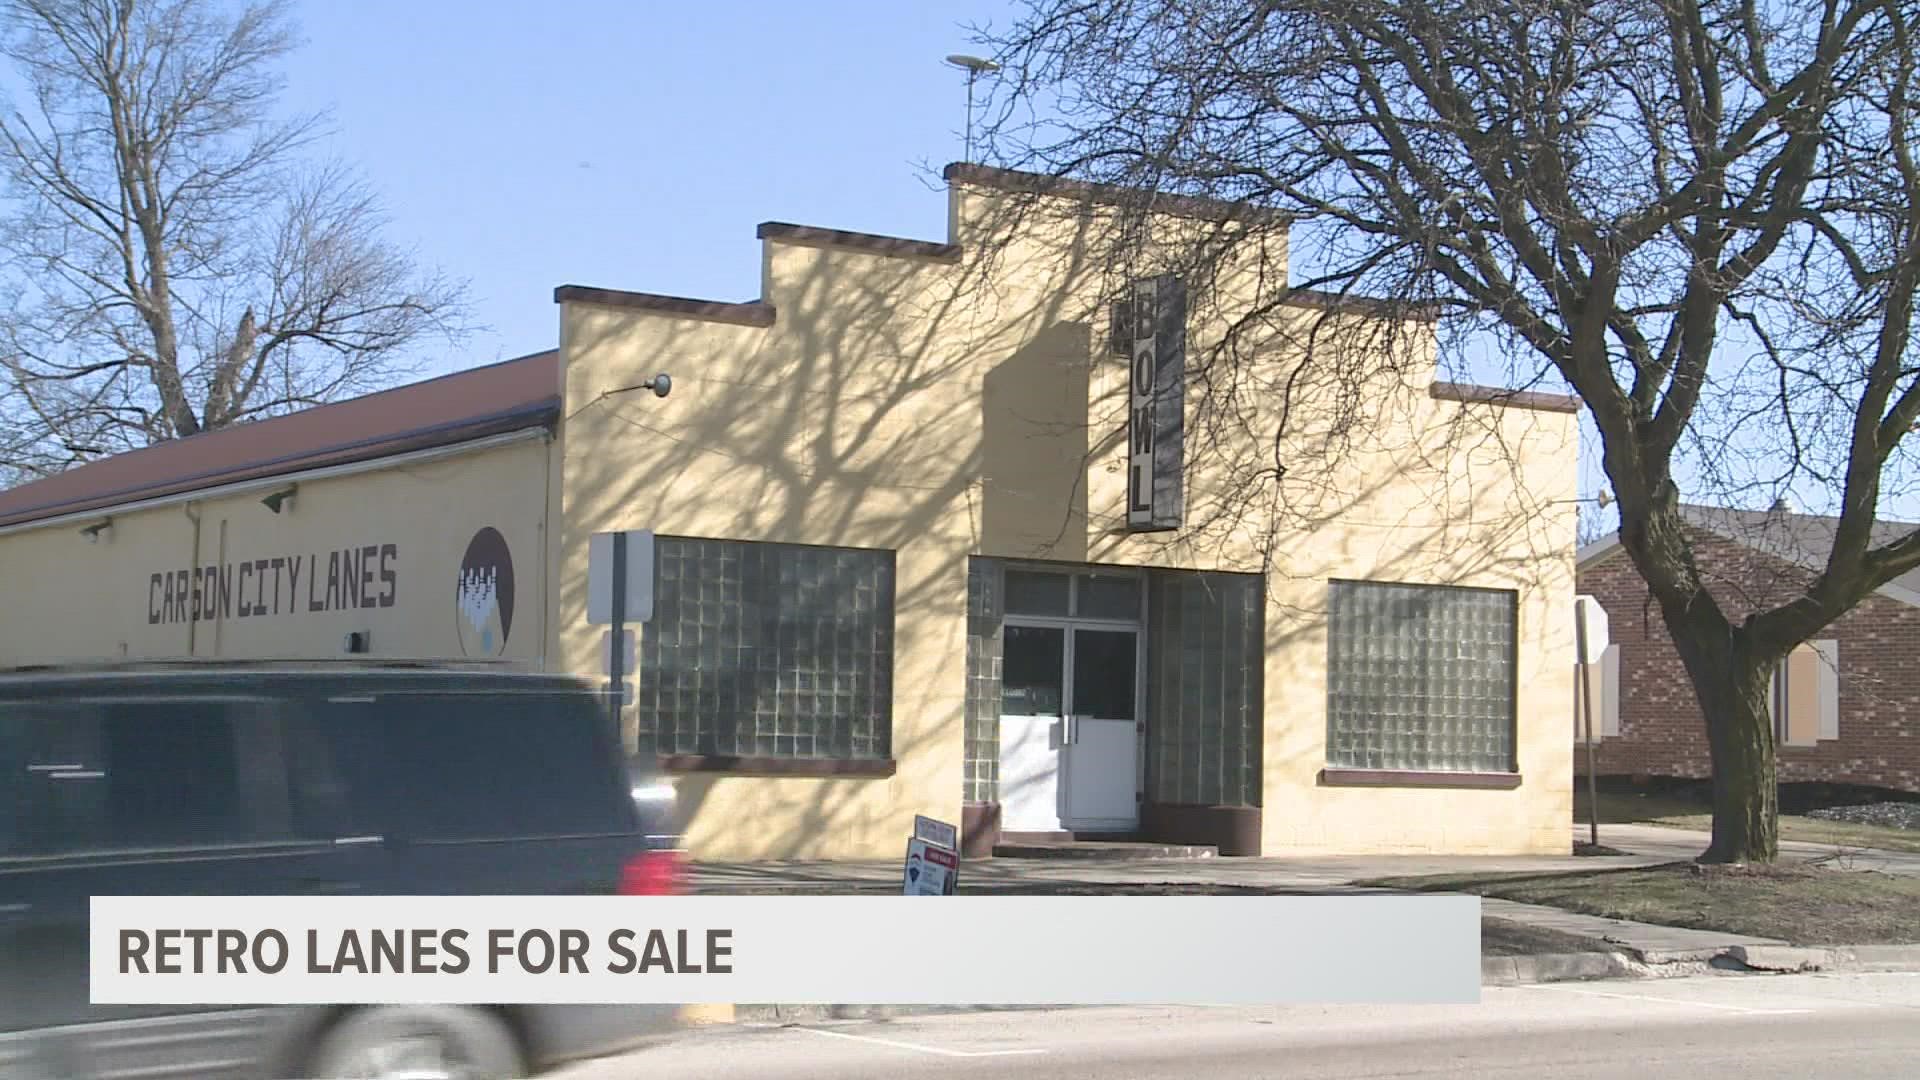 The bowling alley, built in the 1940s, is up for sale for the first time in decades.